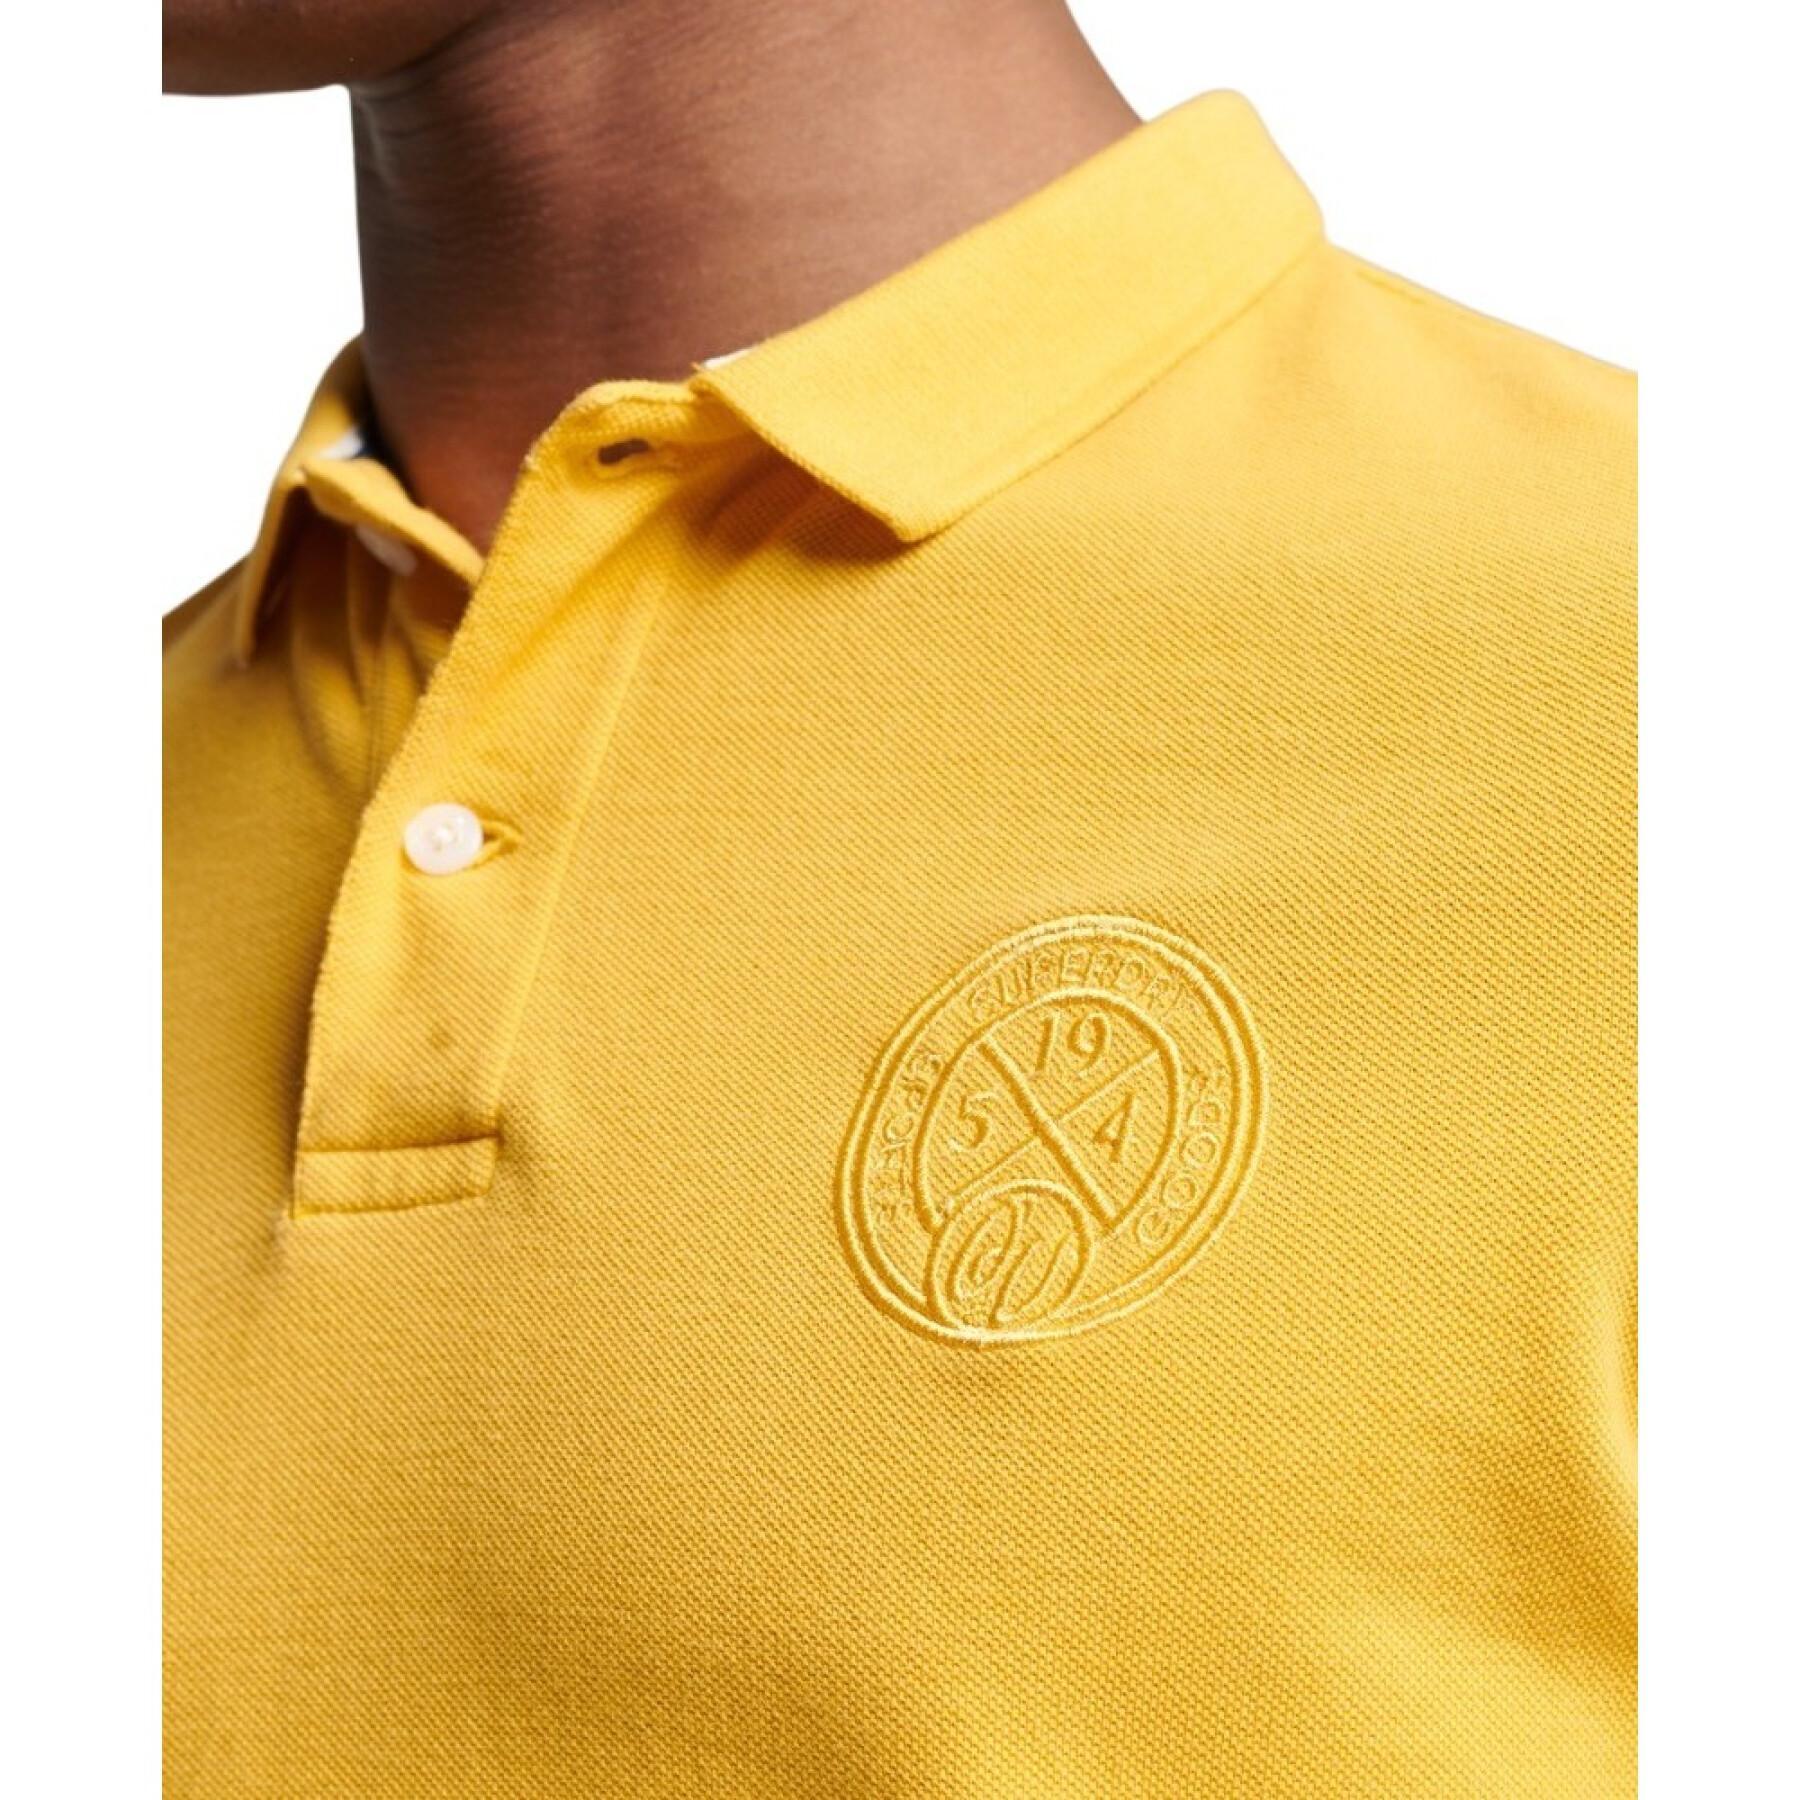 Organic cotton polo shirt Superdry Vintage Superstate